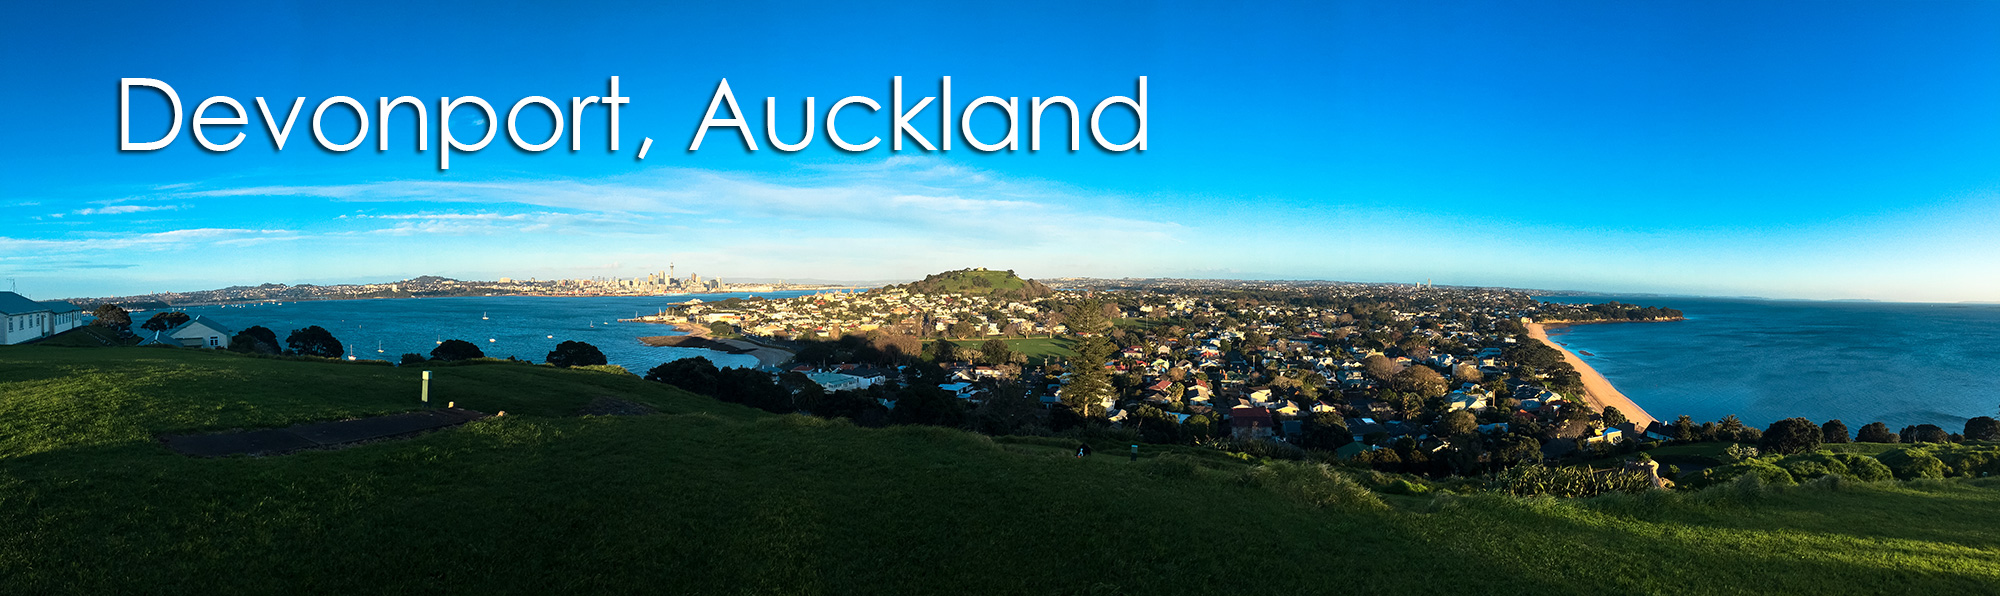 View of Devonport from North Head looking towards Auckland New Zealand